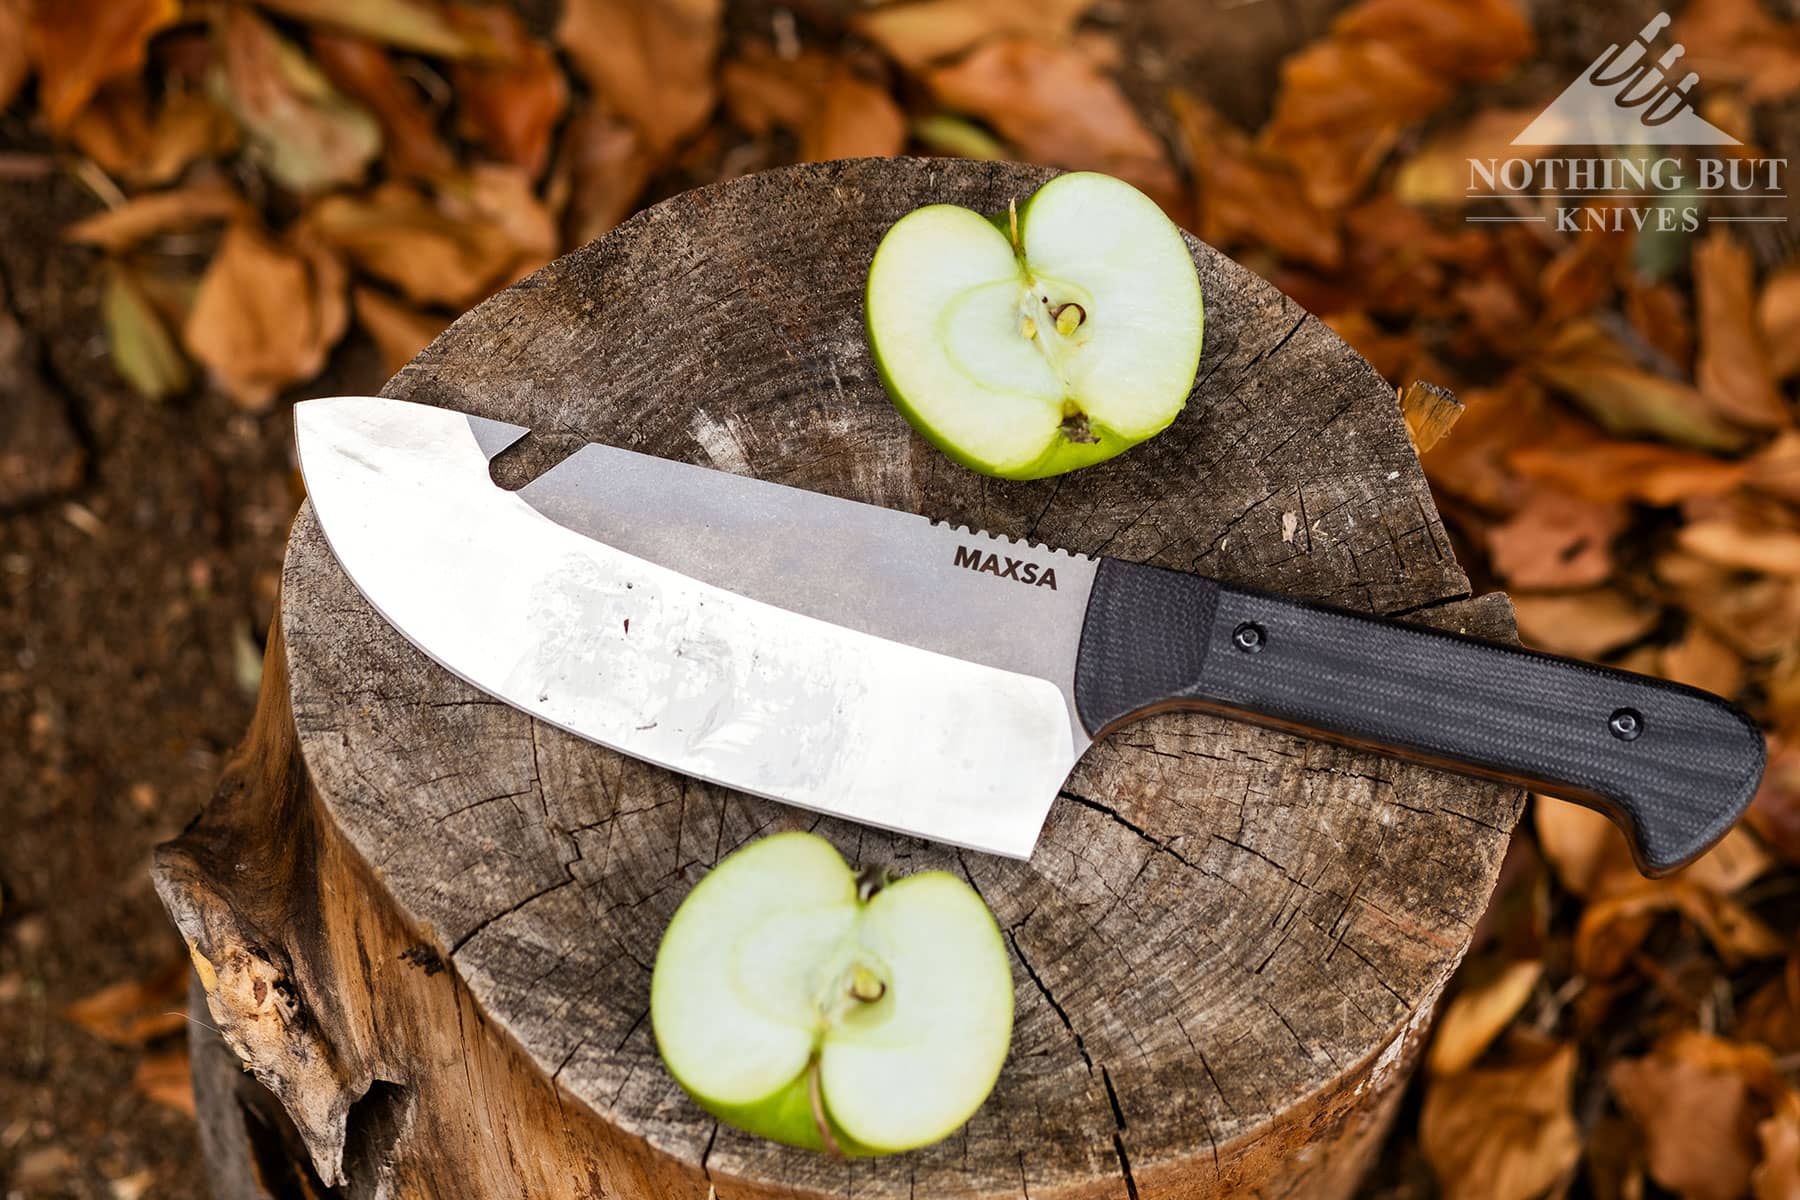 The Maxsa camping chef knife between two haves of an apple it was used to slice.